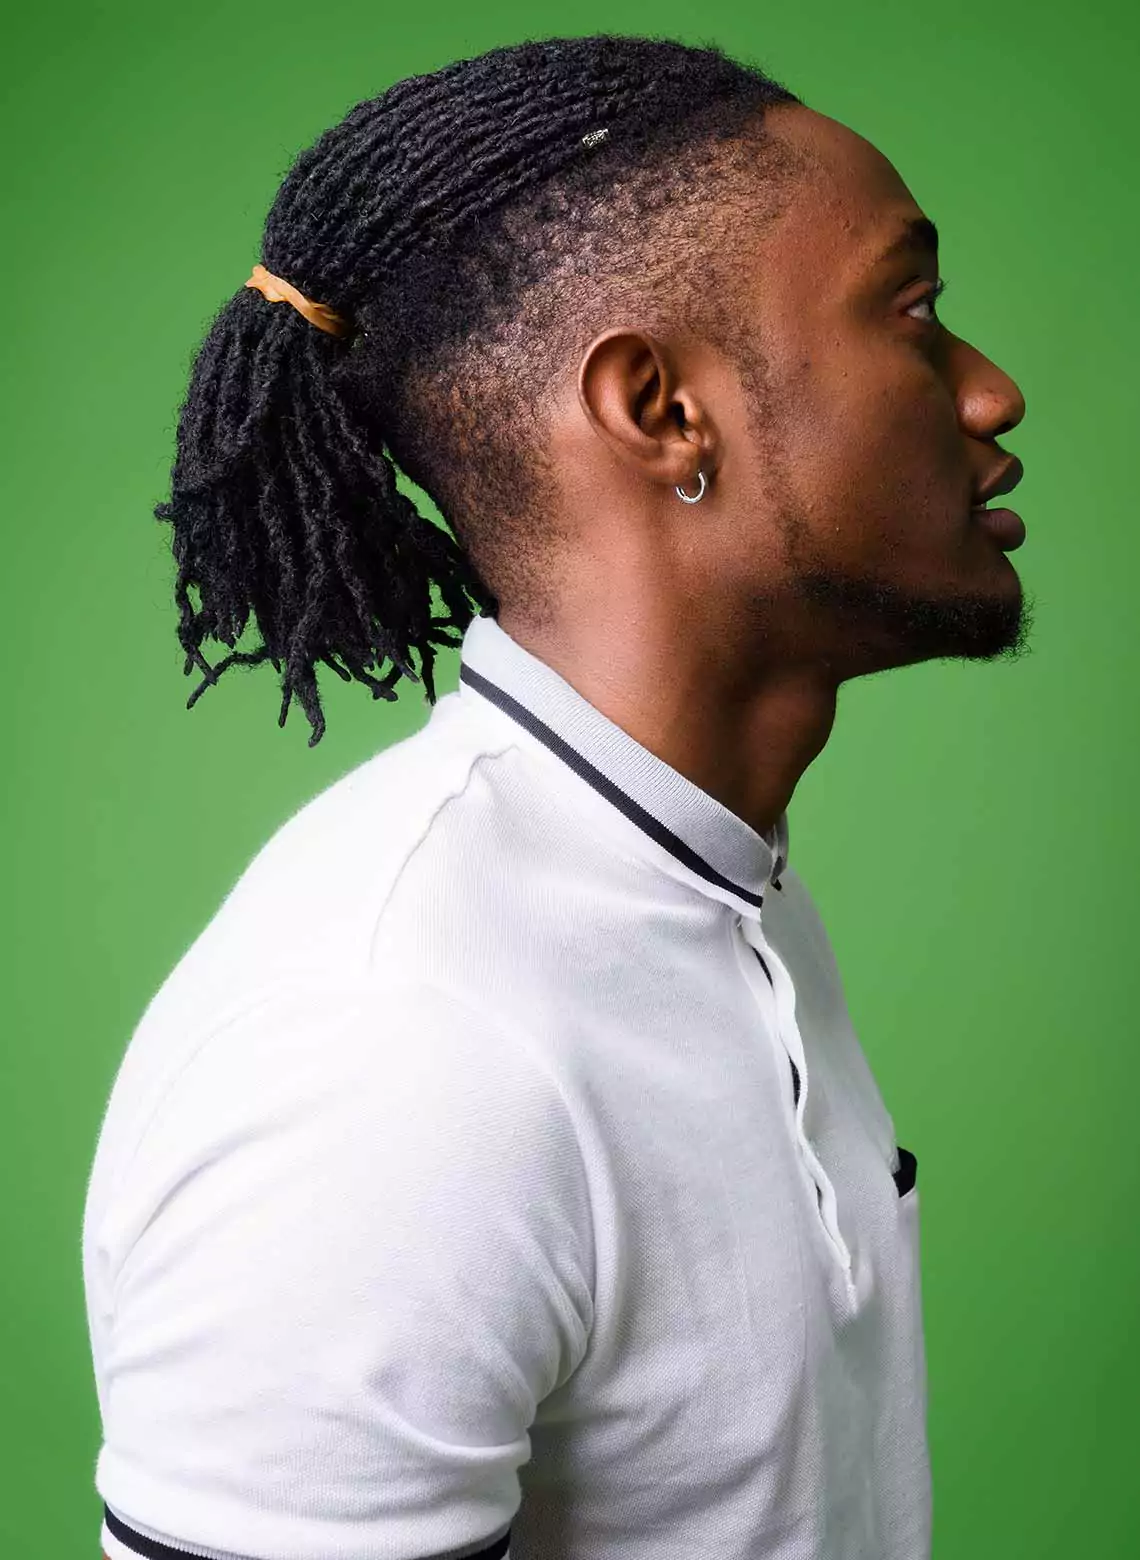 Image of man with locs and a undershave.